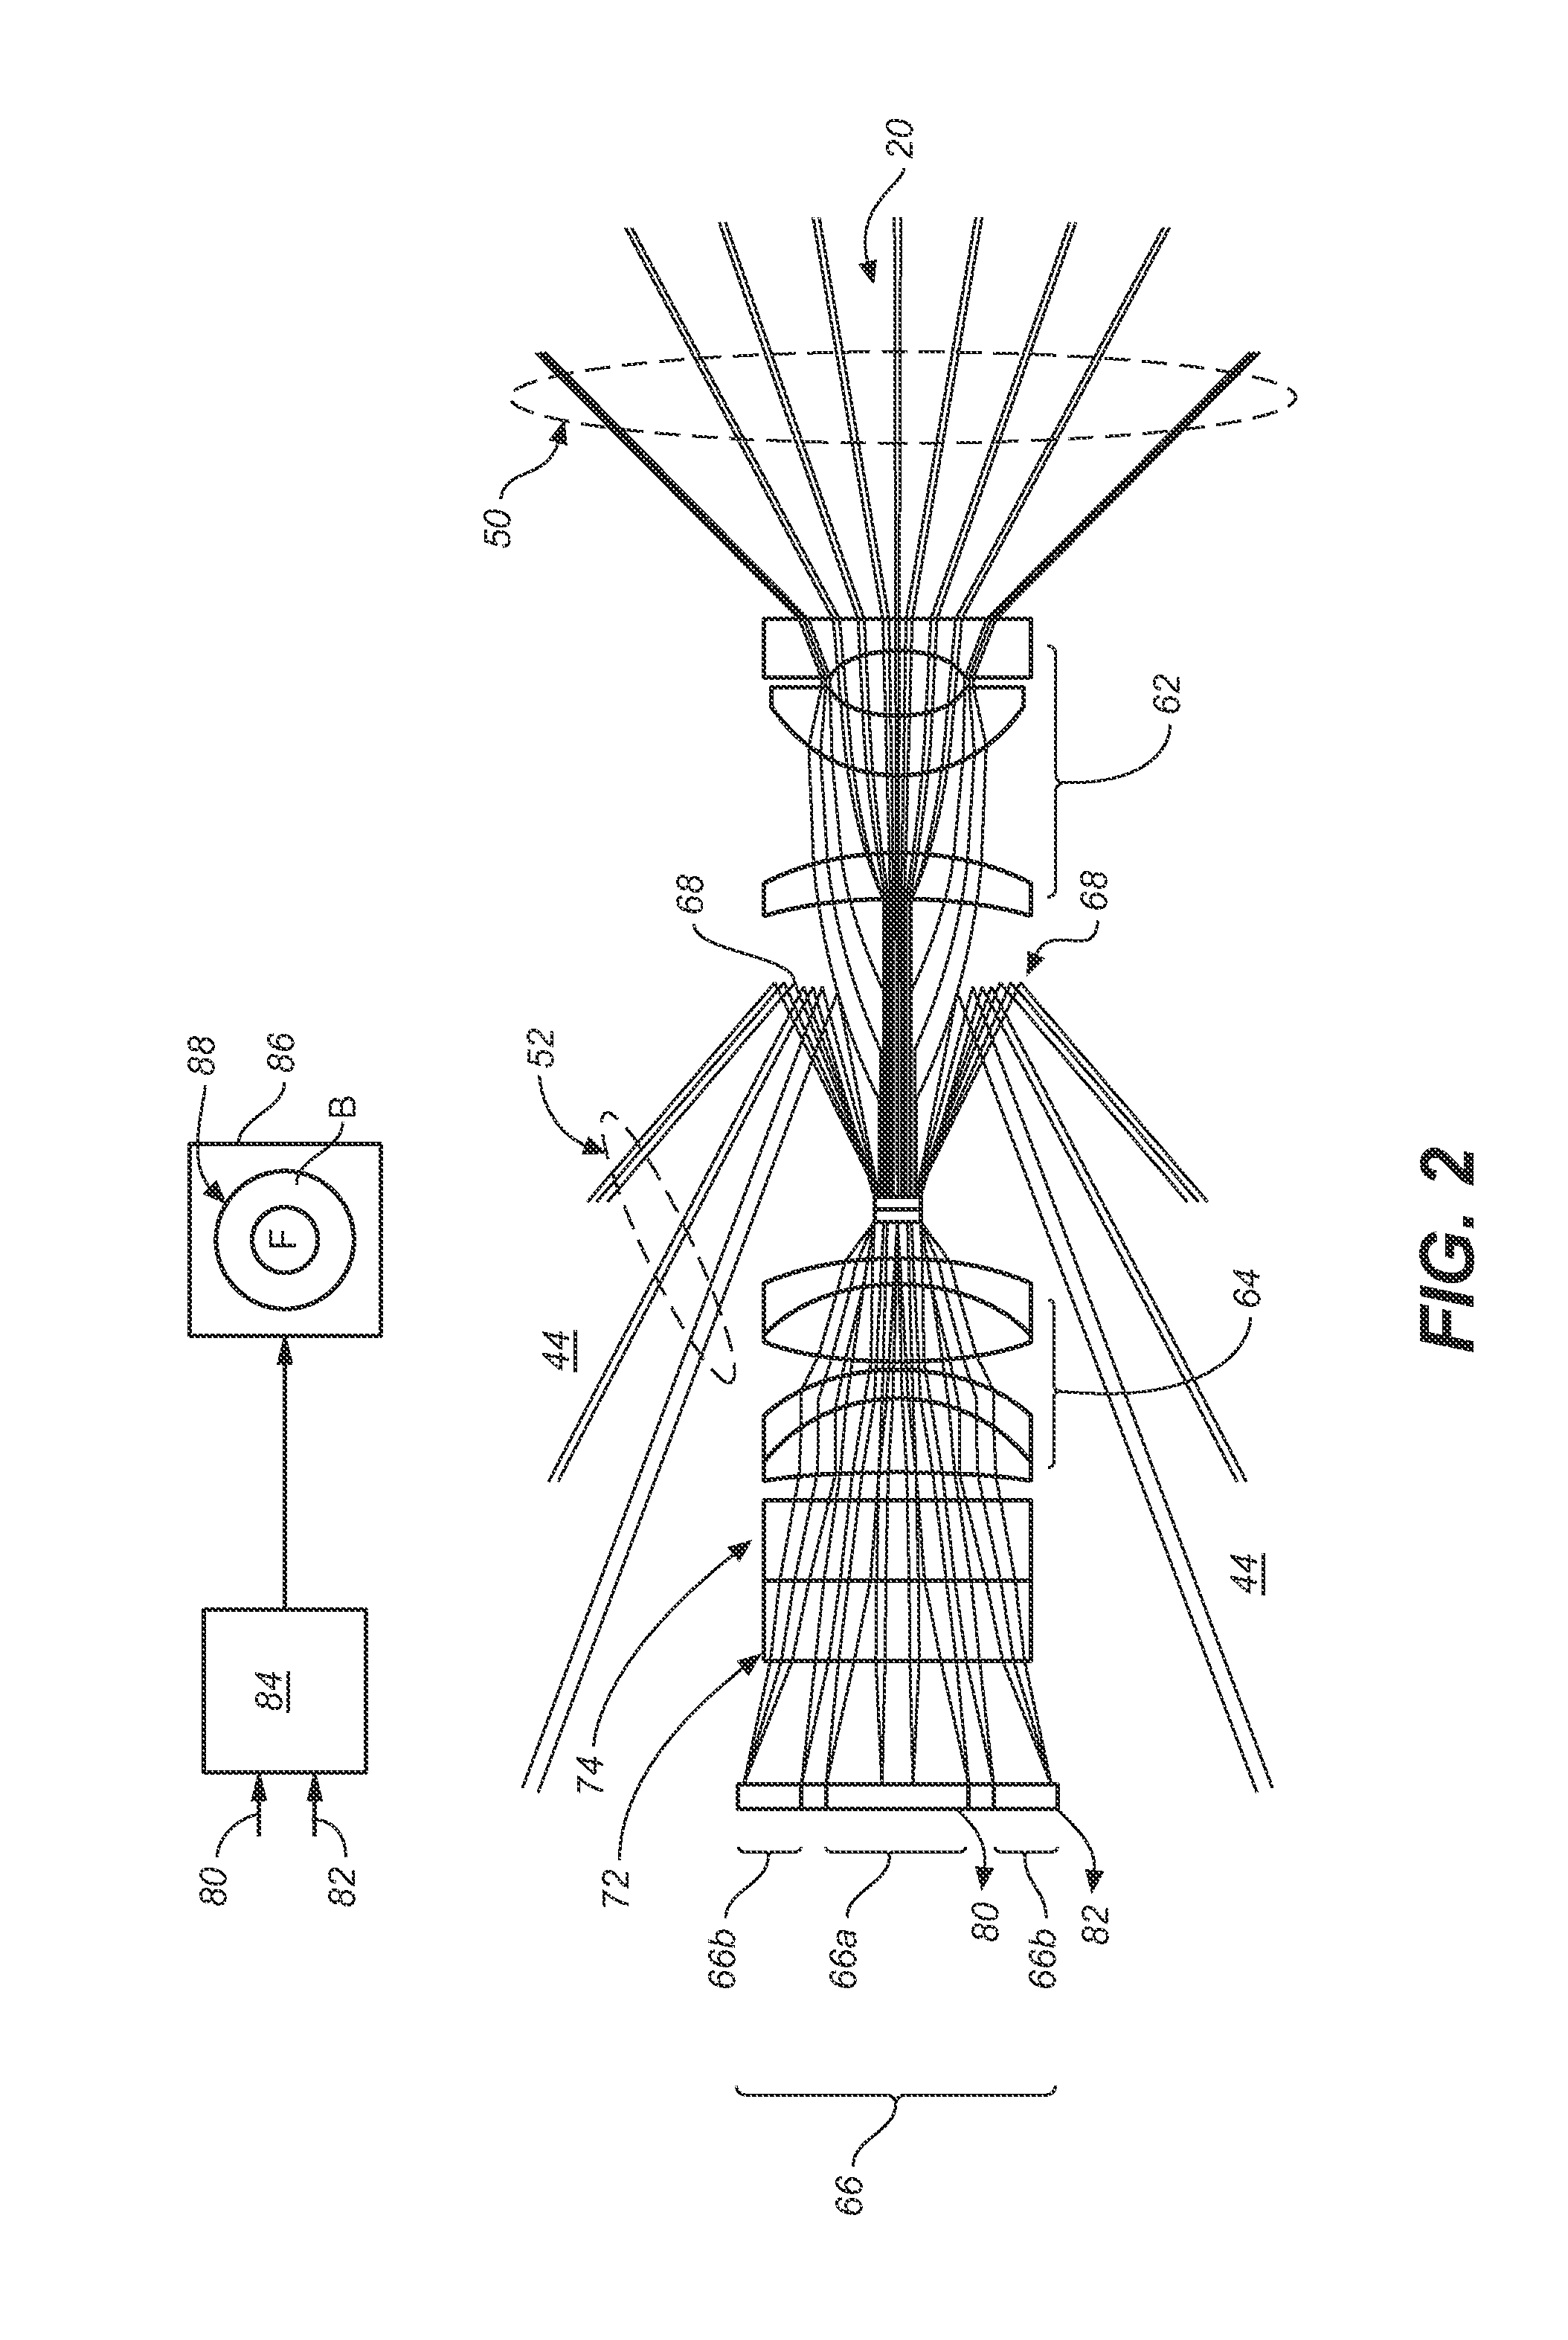 Dual-View Probe for Illumination and Imaging, and Use Thereof